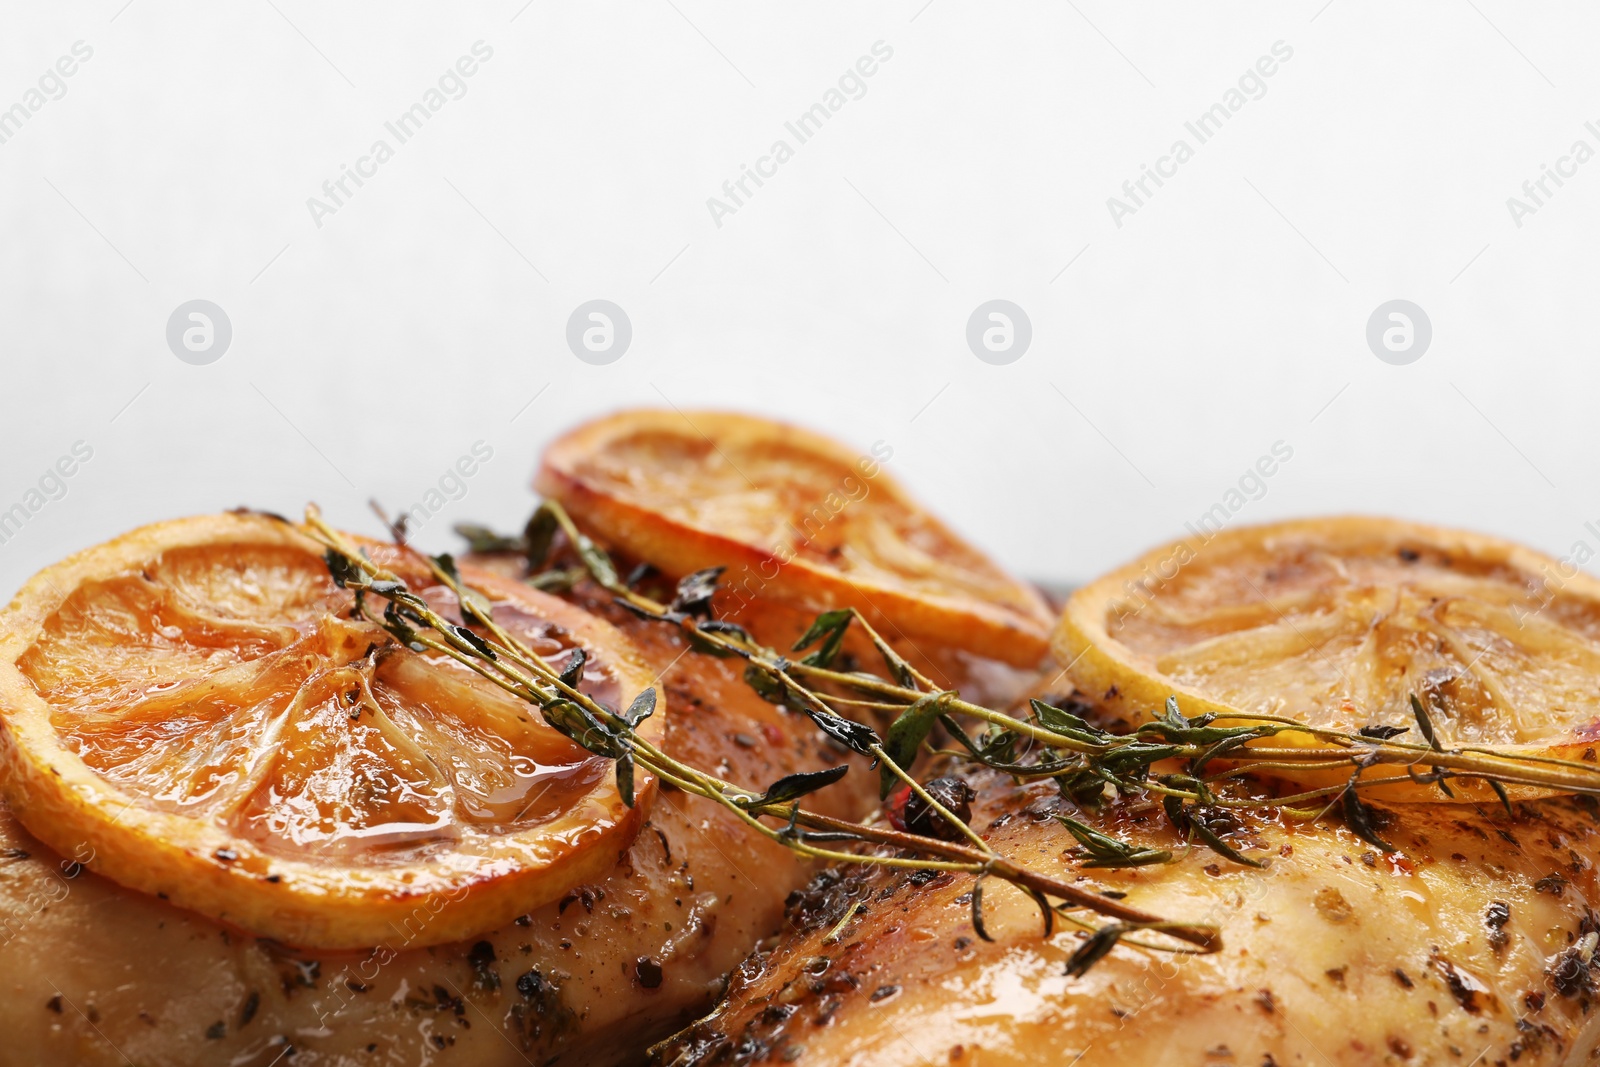 Photo of Delicious lemon chicken with herbs on white background, closeup view